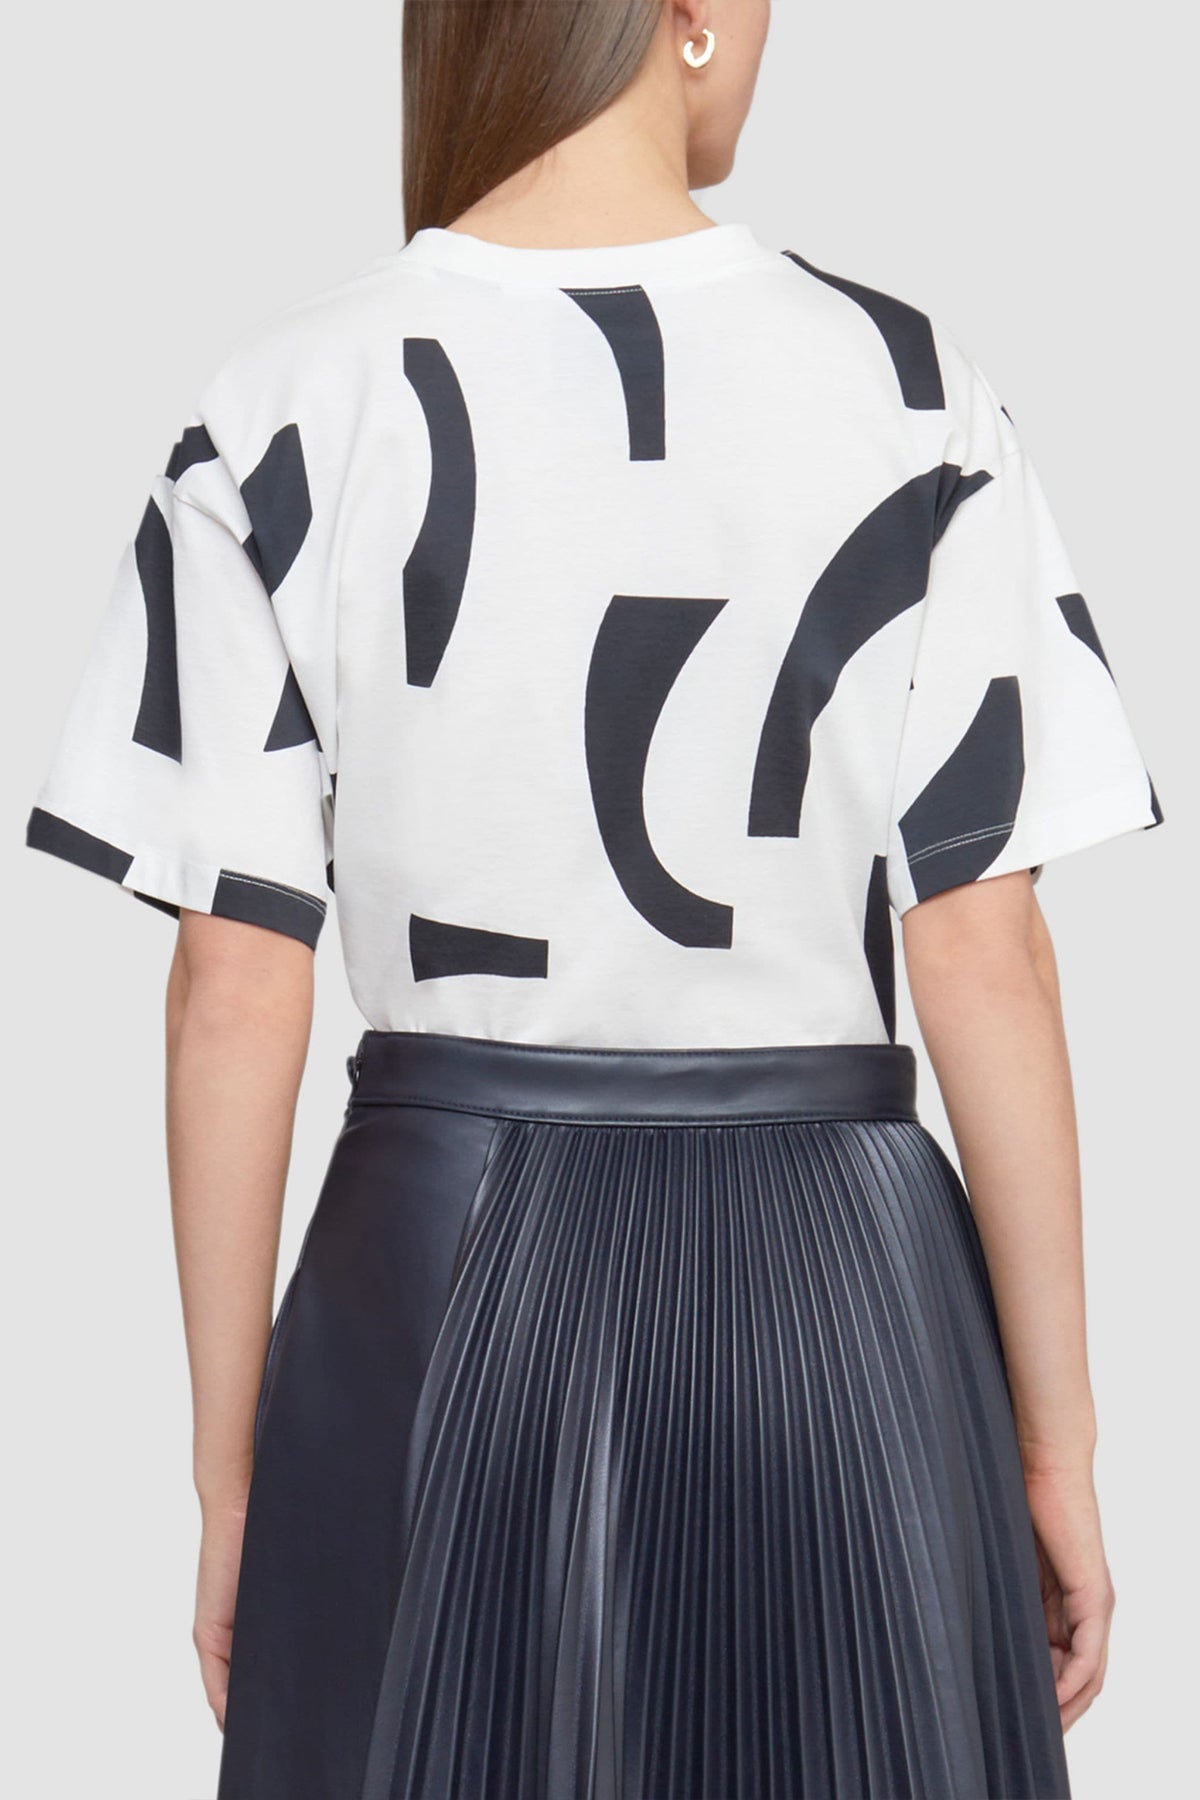 Abstract Tile Oversized T-Shirt in White & Black - shop-olivia.com